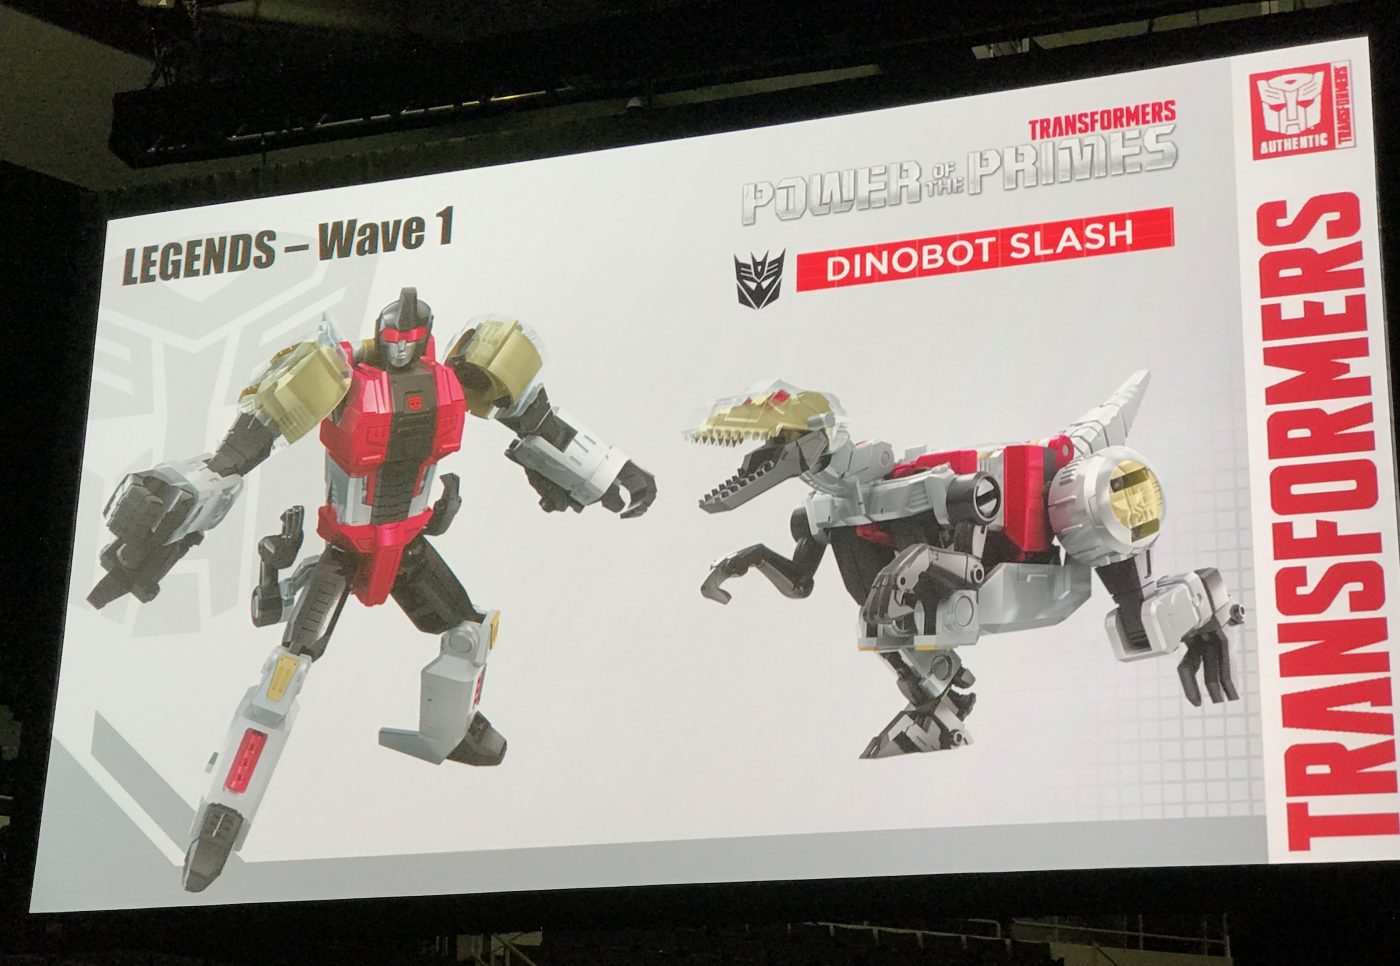 HASCON 2017: First female Dinobot, combiner & other reveals from Transformers: More Than Meets The Eye panel